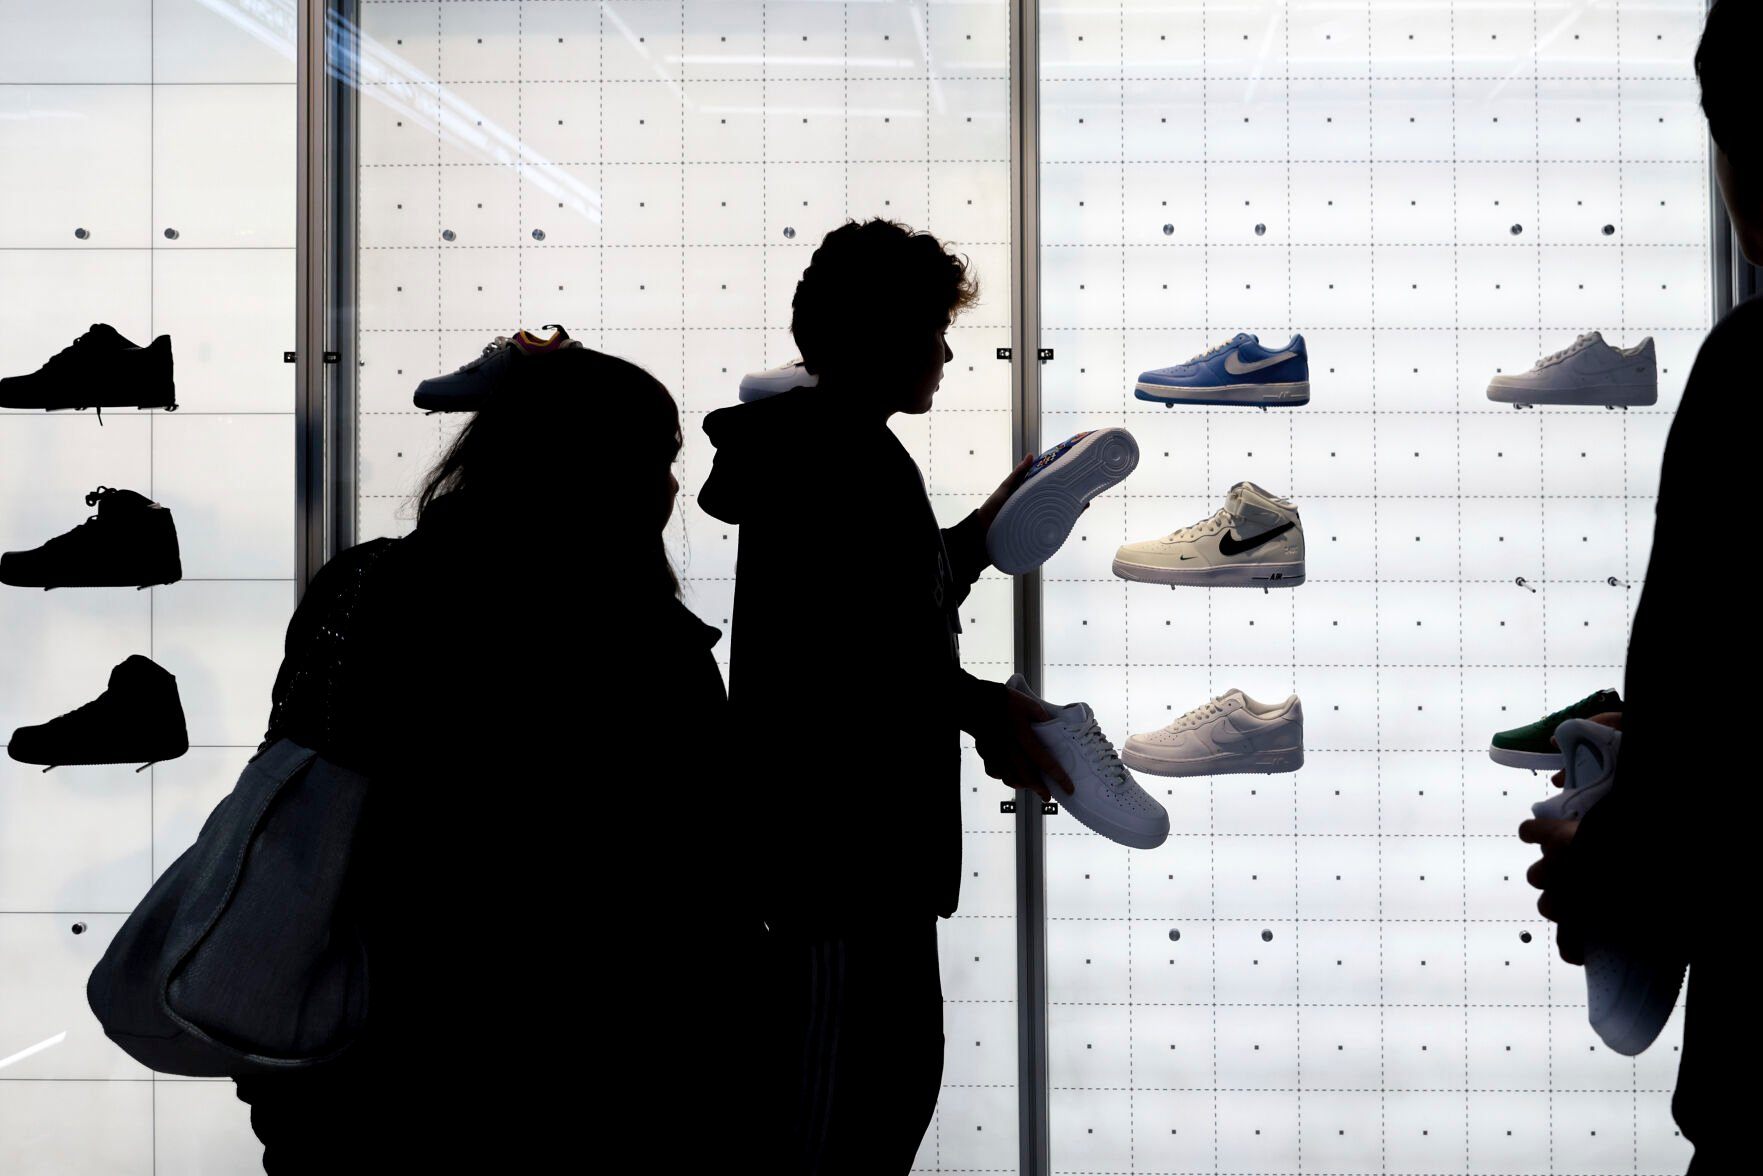 <p>FILE - People shop for shoes in a Nike store on , Nov. 25, 2022, in New York. “Buy now, pay later” services like Affirm, Afterpay and Klarna can sometimes provide a cheaper, more accessible version of credit. These services essentially provide customers an alternative way to pay for purchases over time without going into credit card debt or taking out a traditional personal loan. Travel purchases, such as airfare and vacation rentals, are the fastest-growing segment for buy now, pay later services. However, the Consumer Financial Protection Bureau warns that usage can come at an even greater cost. These services typically entail late fees and can lead travelers to spend more than they otherwise would. (AP Photo/Julia Nikhinson, File)</p>   PHOTO CREDIT: The Associated Press